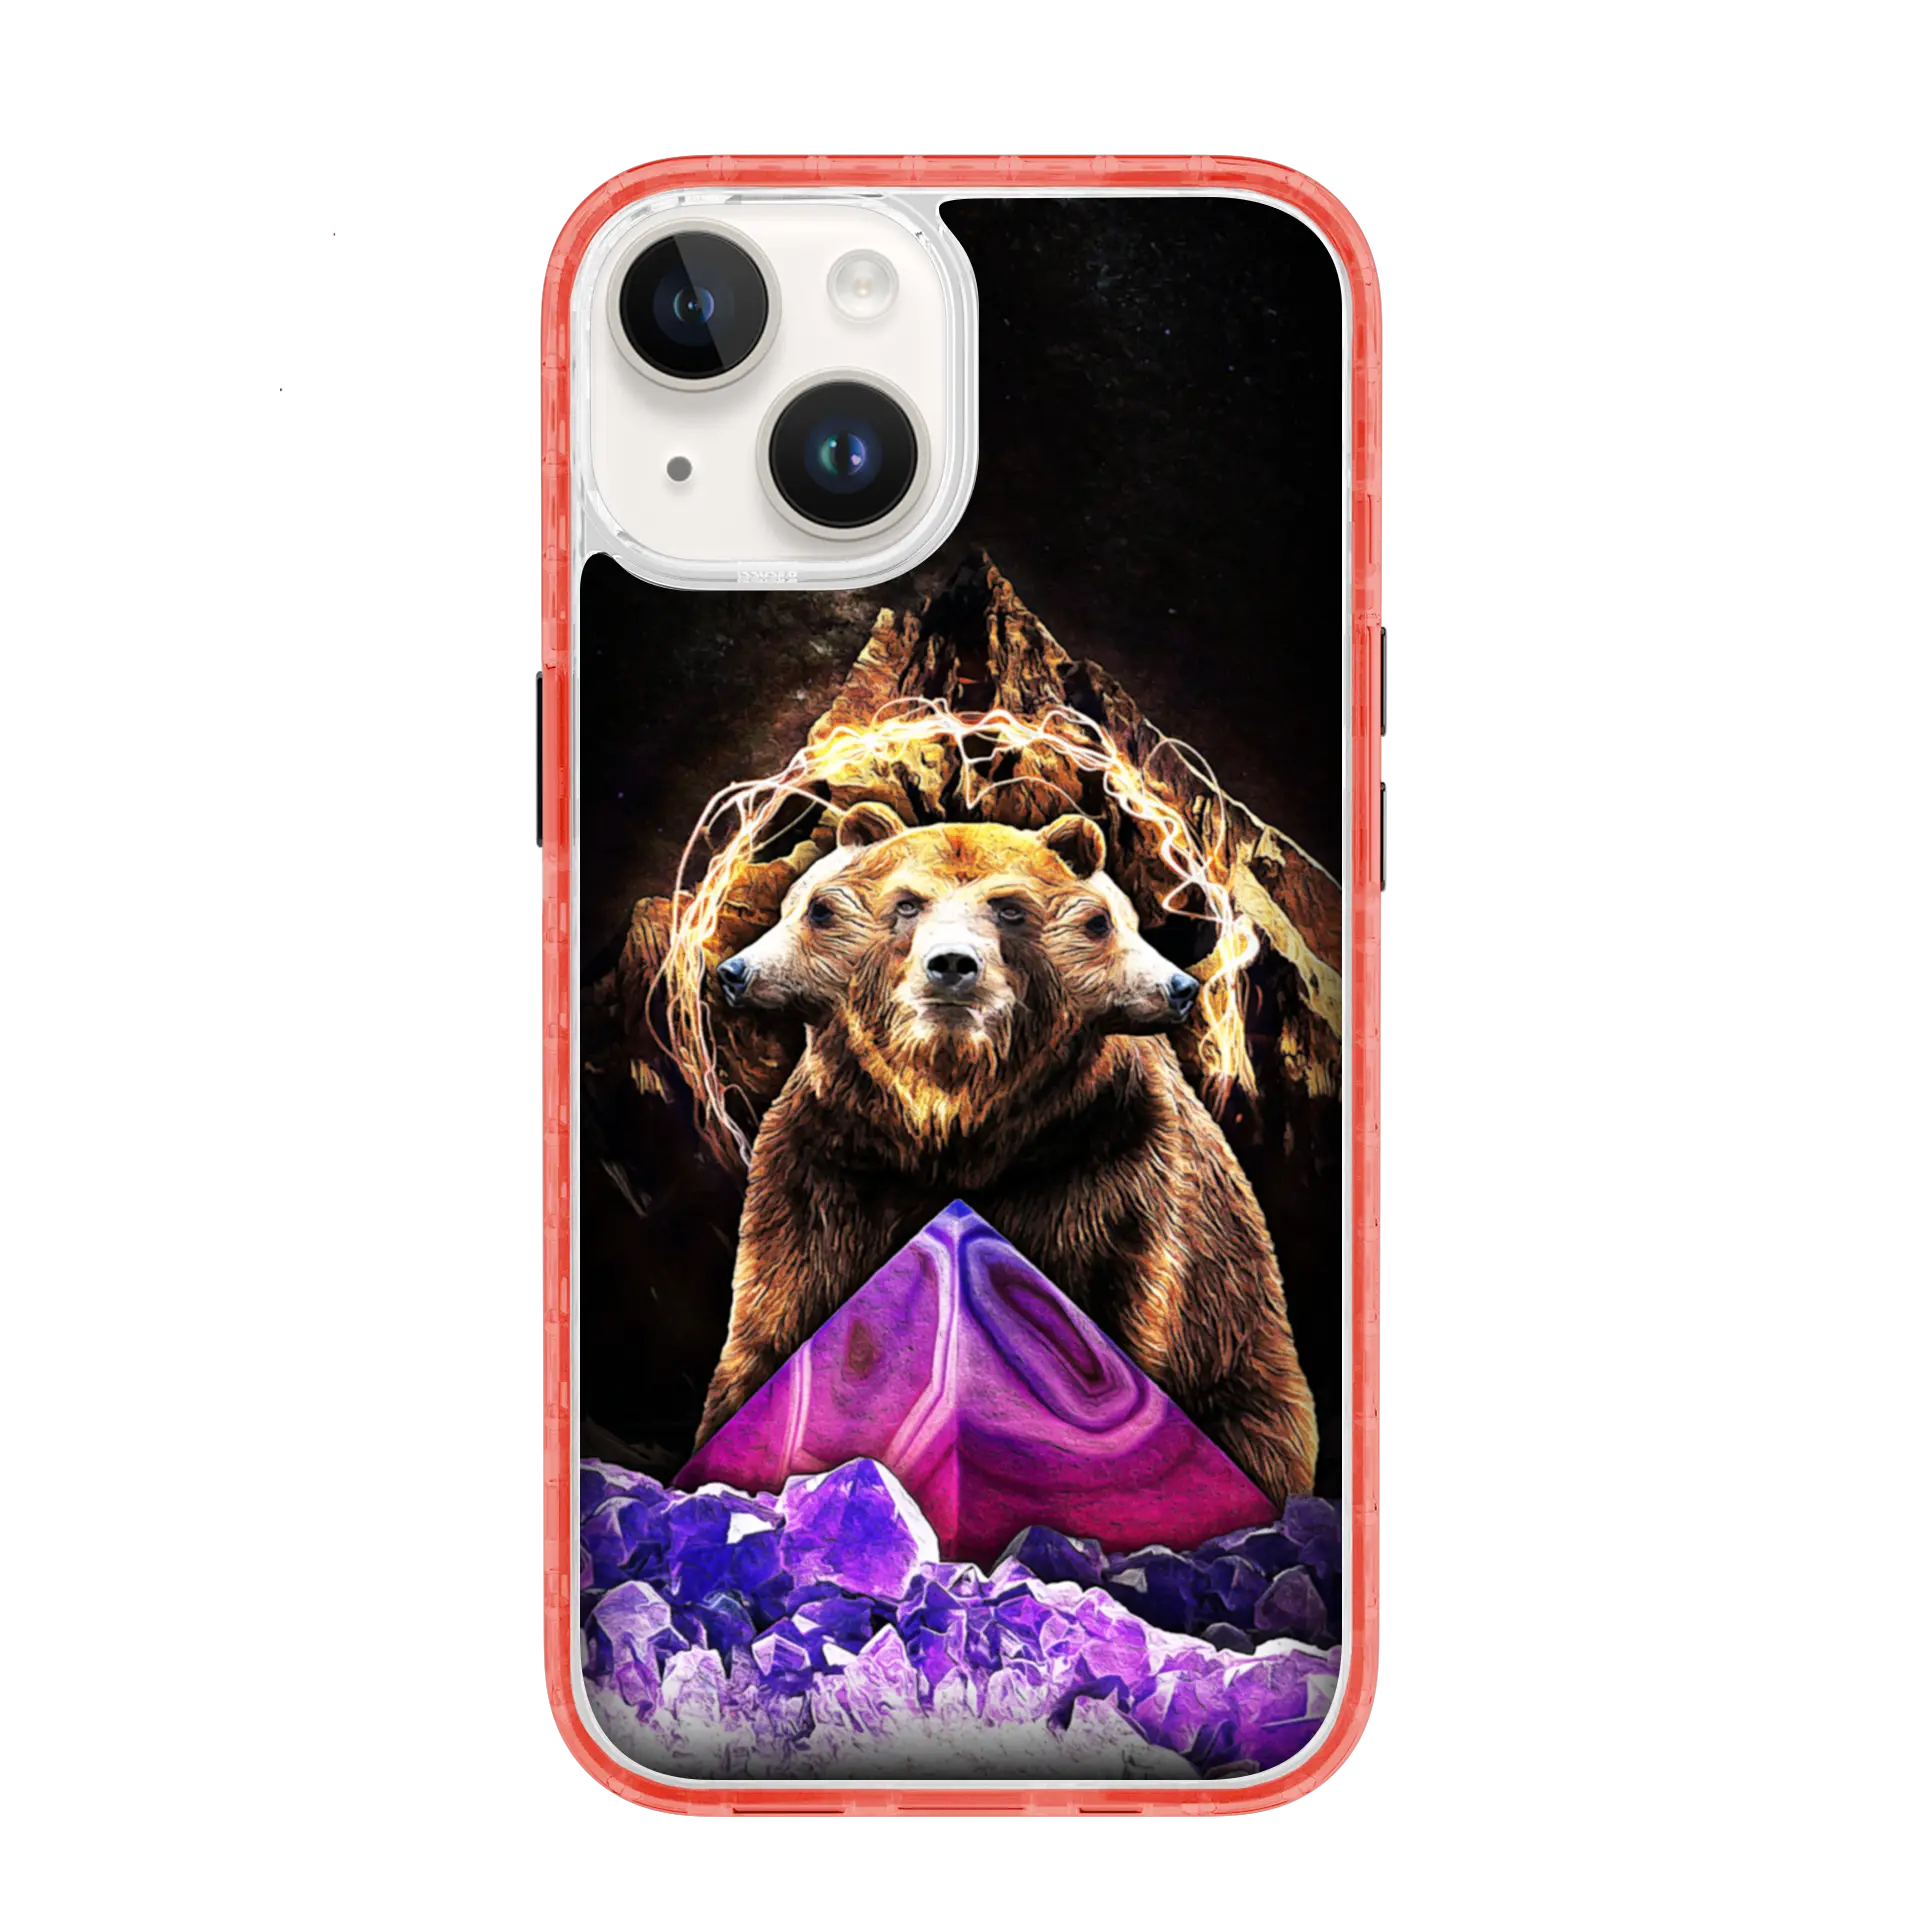 AppleiPhone14PlusTurboRed Grizzly Widsom | Wizards & Wyrms Series | Custom MagSafe Case Design for Apple iPhone 14 Series cellhelmet cellhelmet